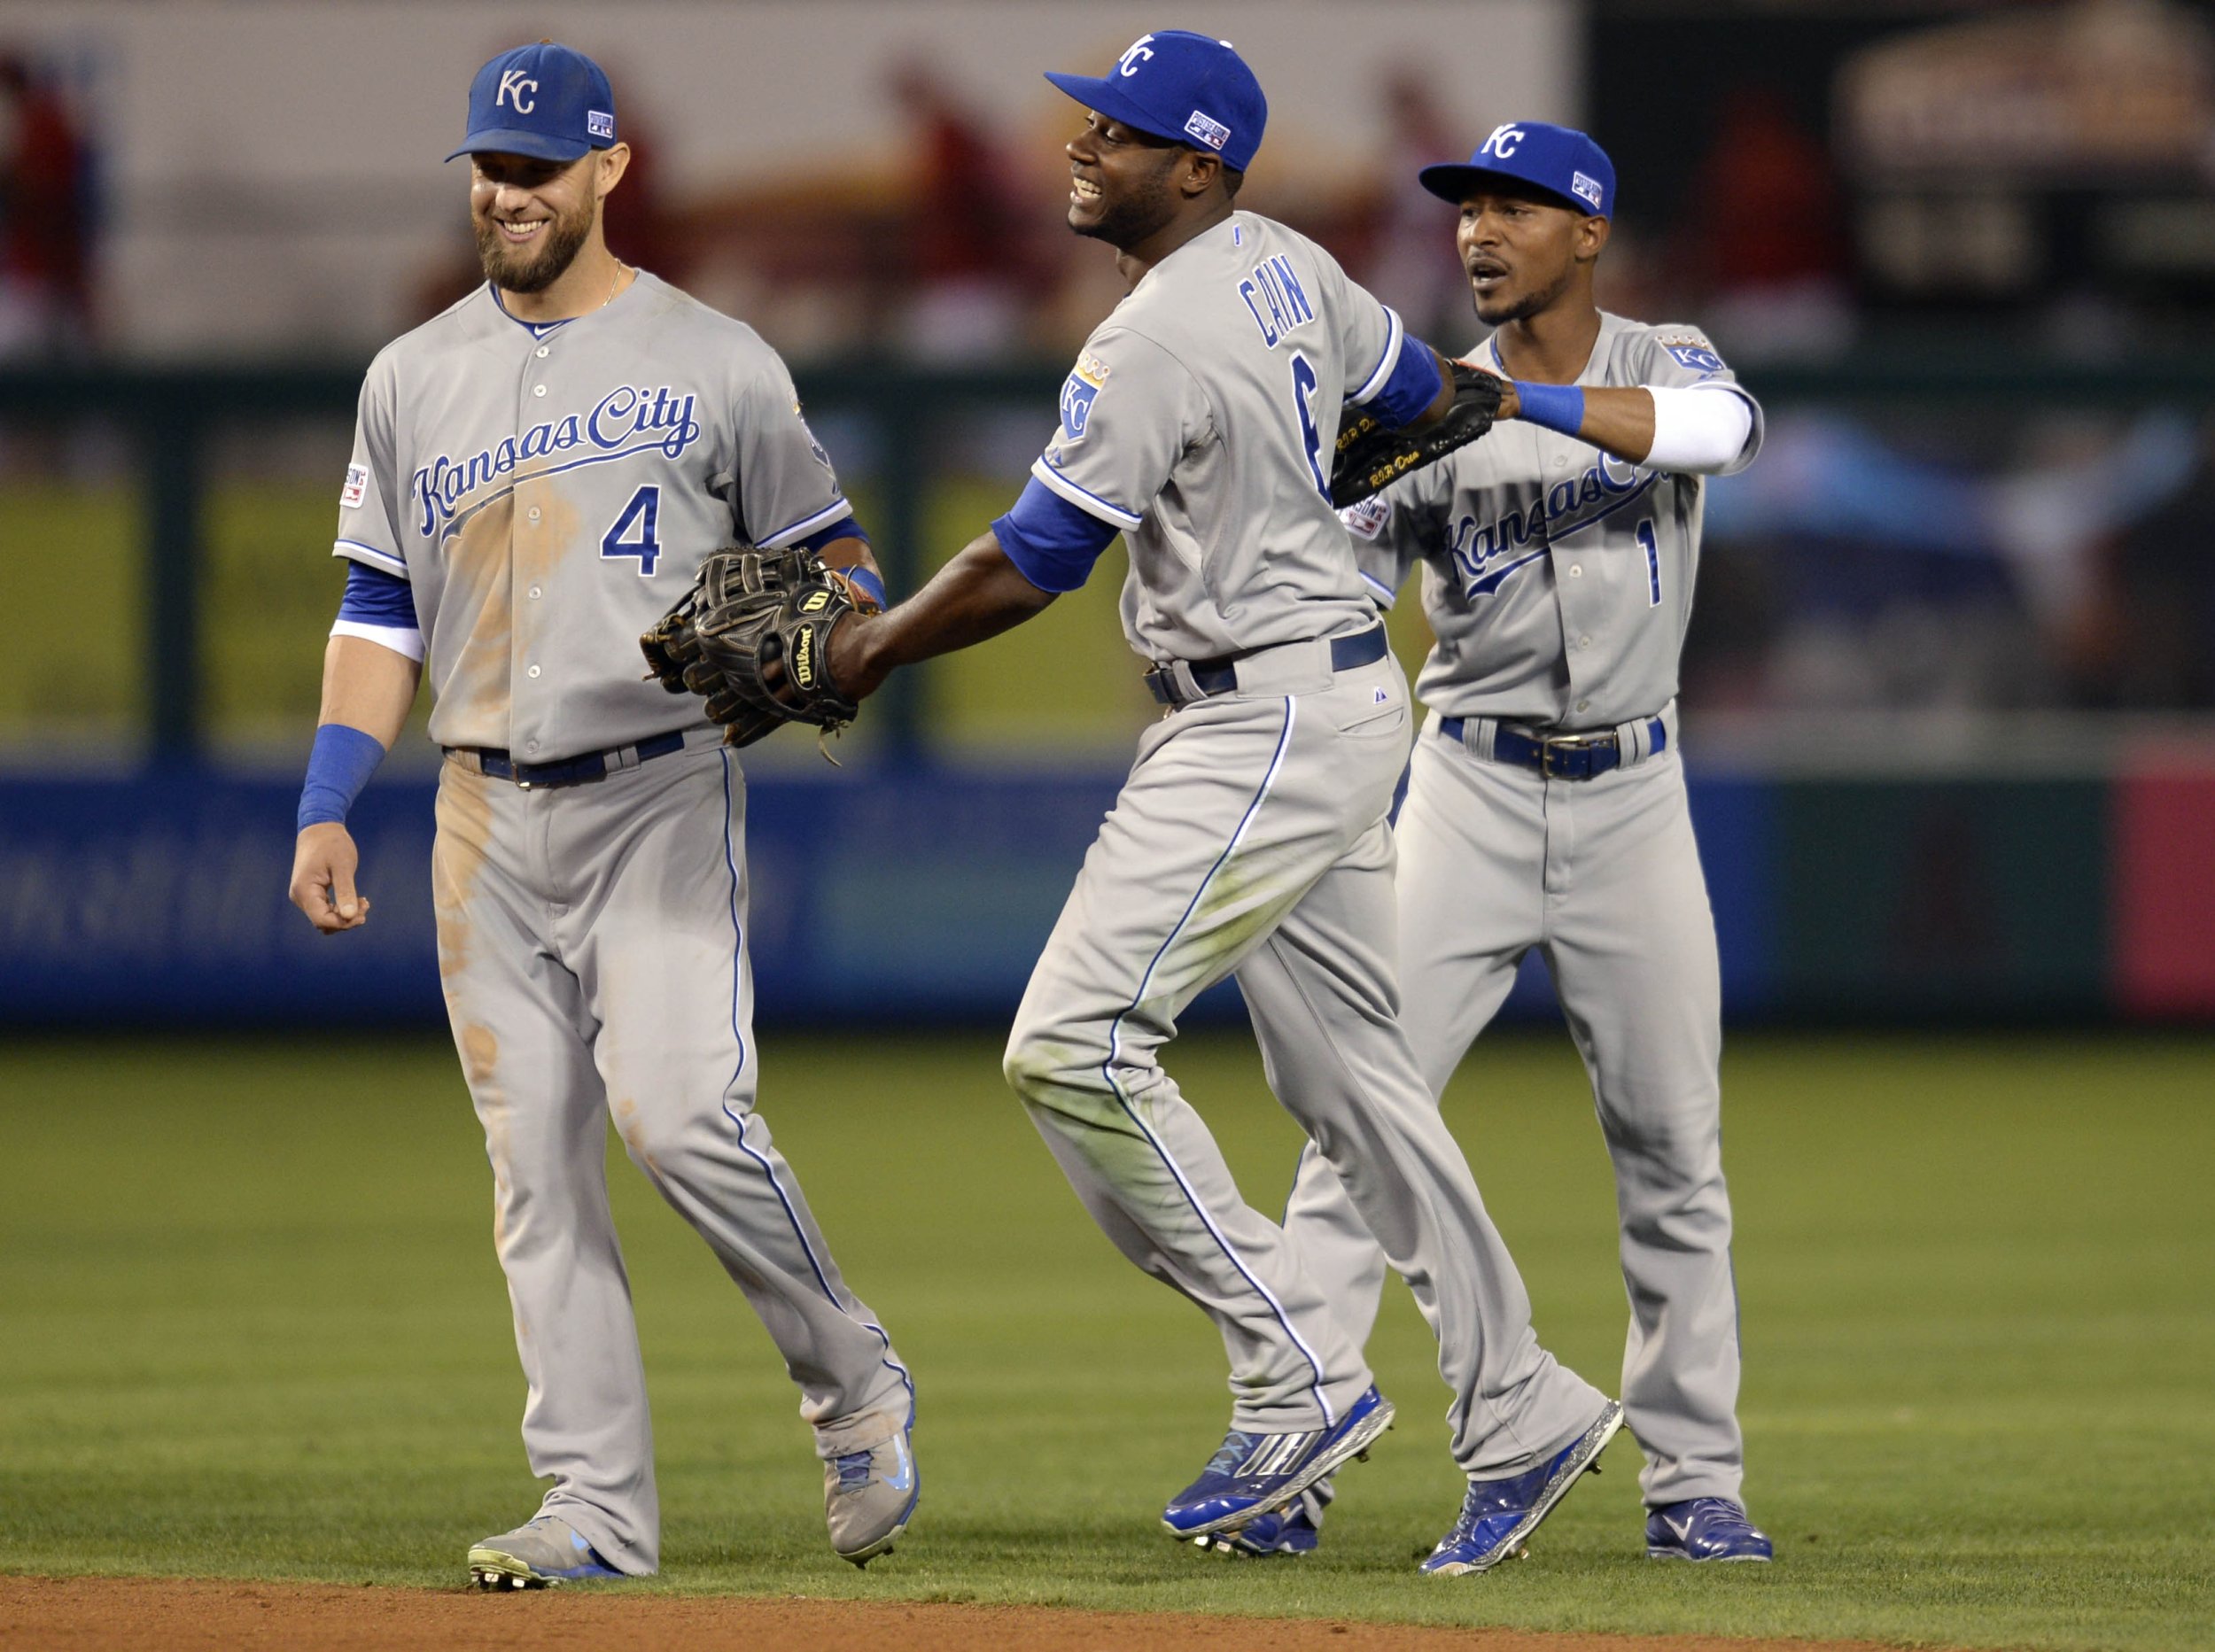 MLB Playoffs 2014 Opening Day Payrolls For LA Dodgers, KC Royals Show